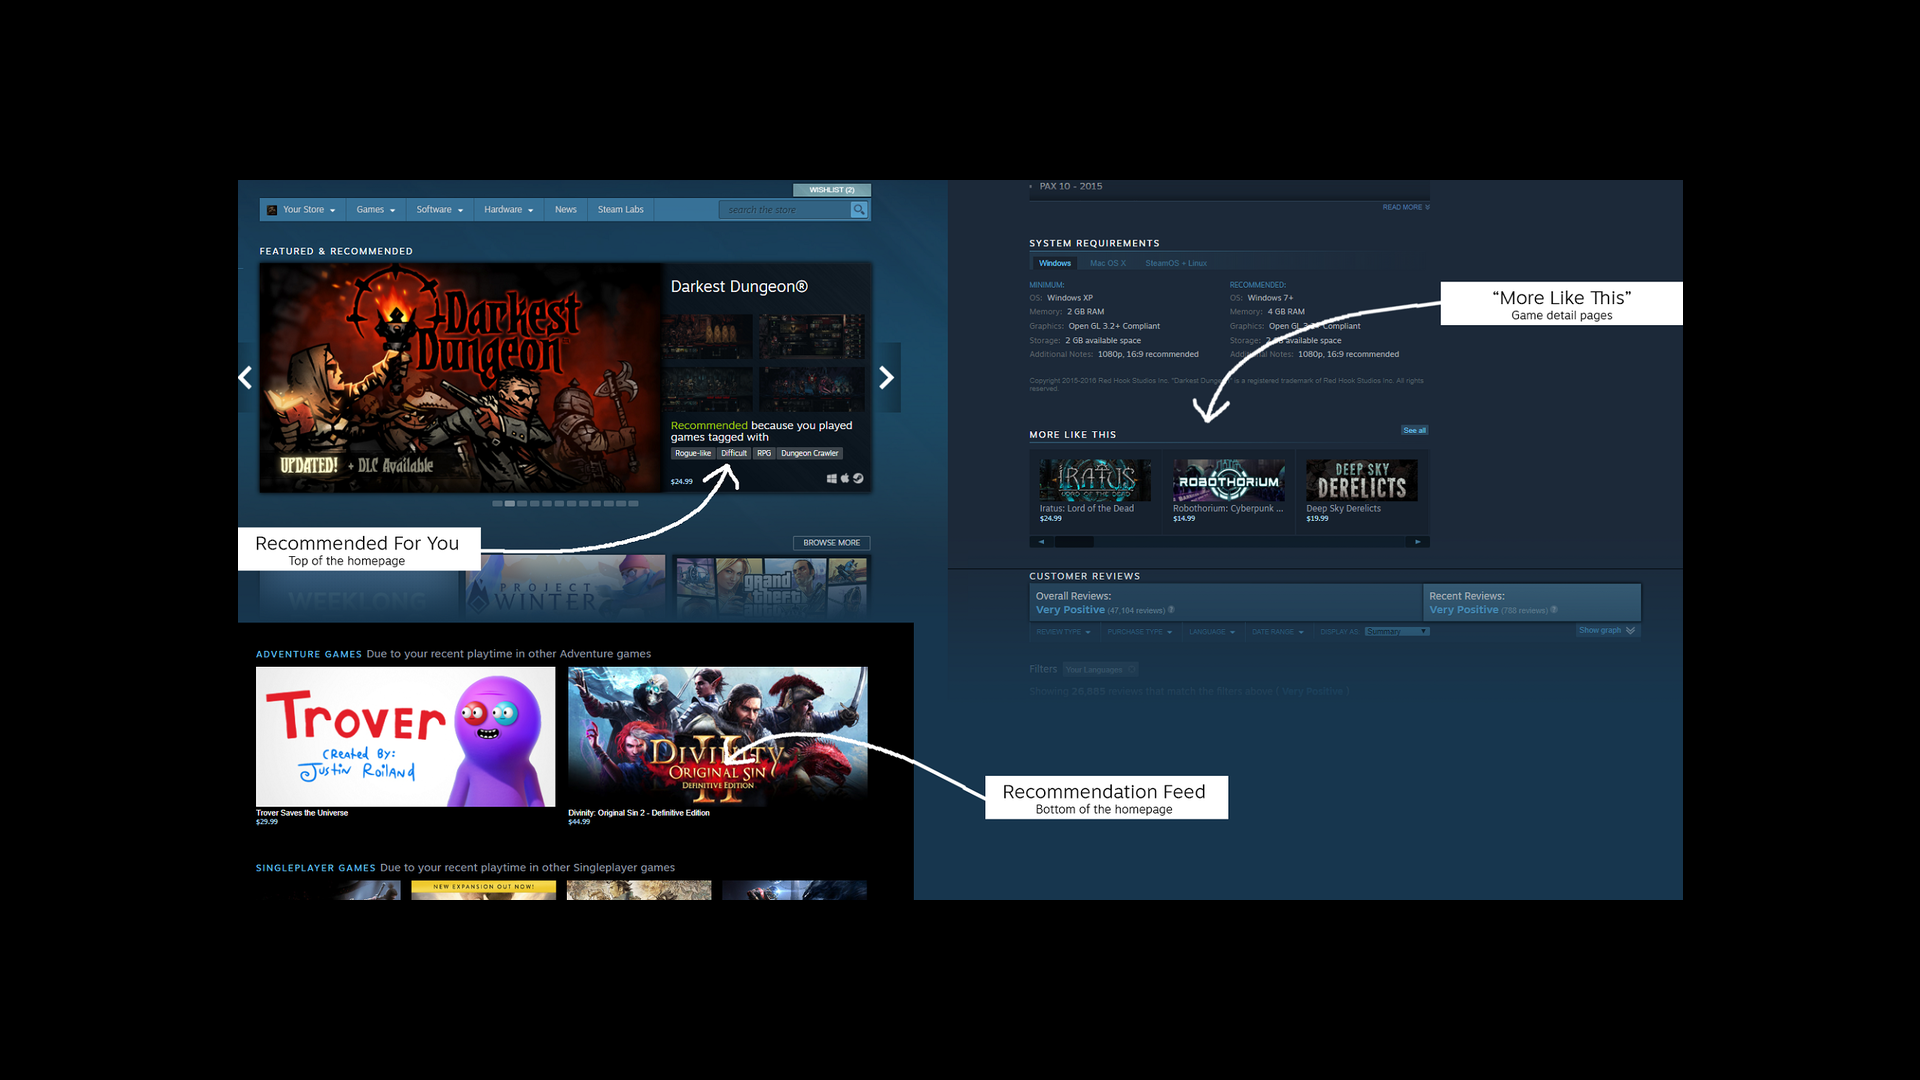 Steam store refresh elevates recommendations, previews